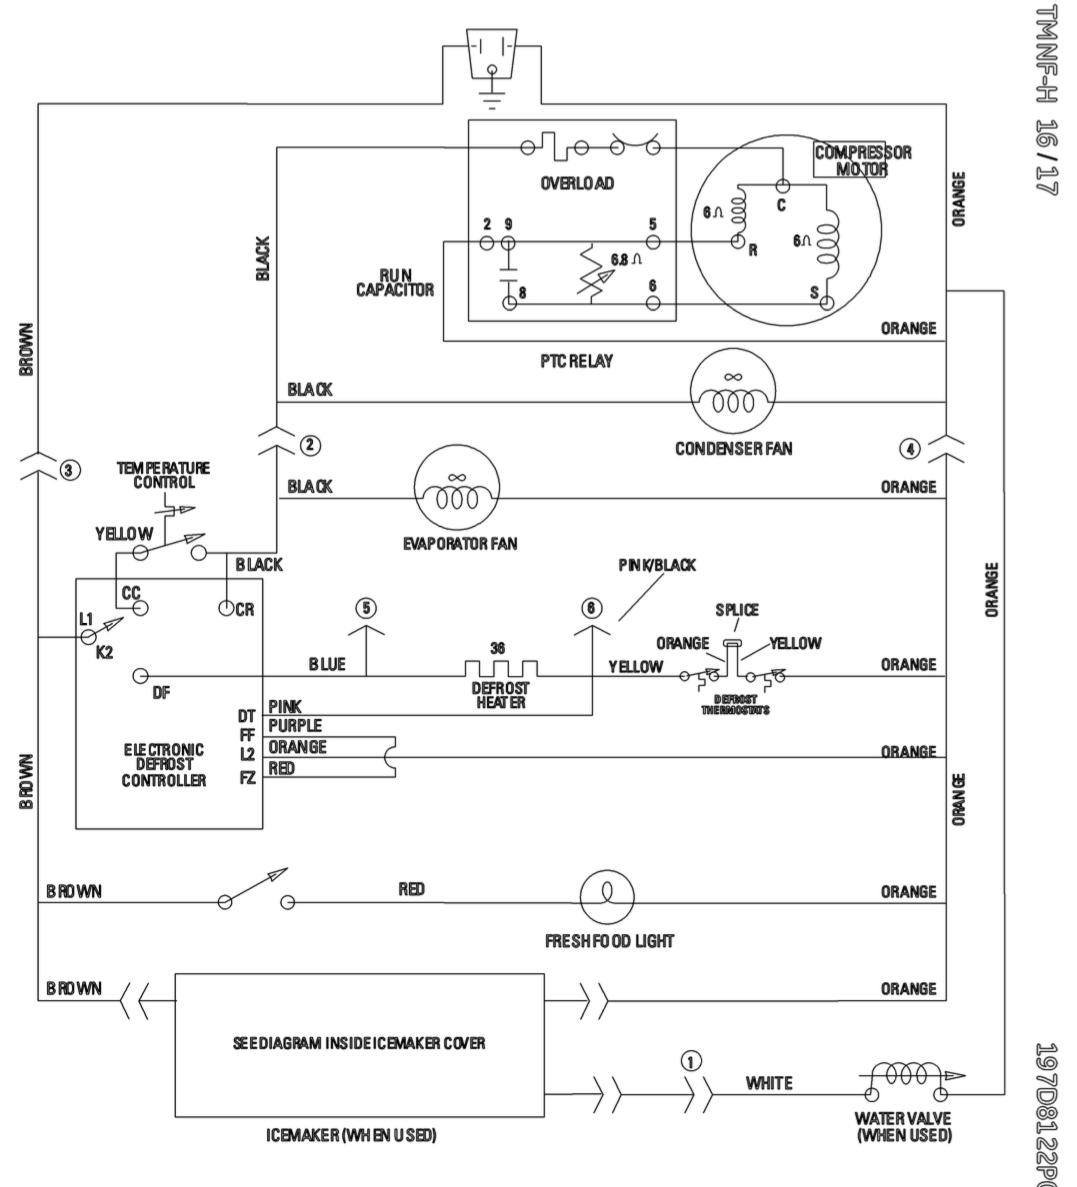 A wiring diagram is a simple visual representation of the physical connections and physical layout of an electrical system or circuit. Wiring Diagram Of Whirlpool Refrigerator Volvo Wiring Diagrams Download Bege Wiring Diagram